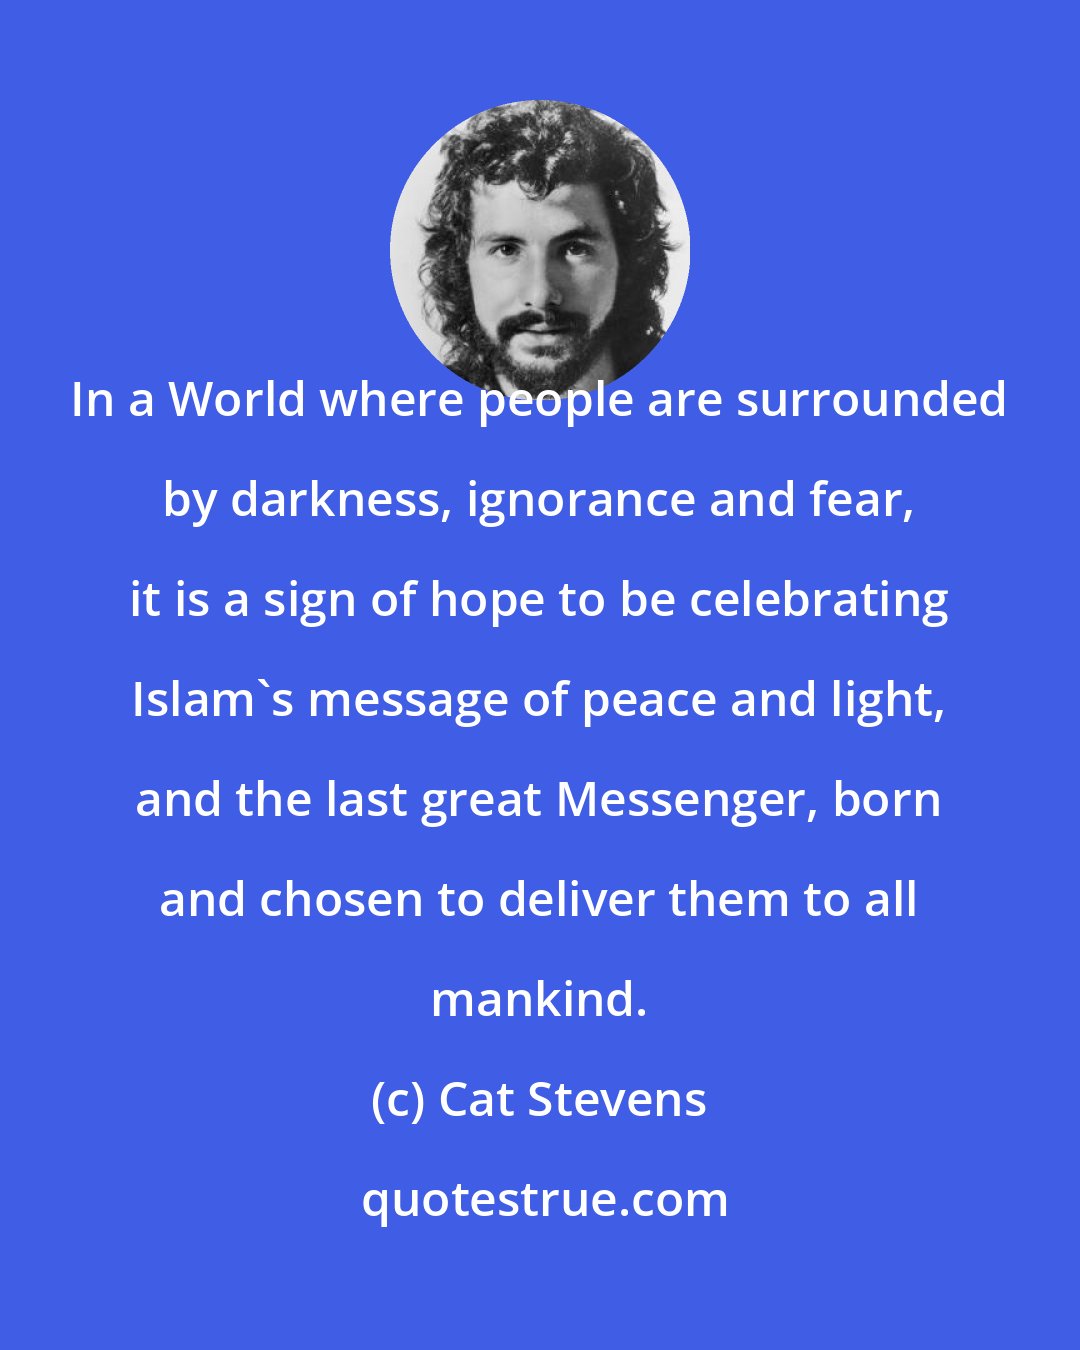 Cat Stevens: In a World where people are surrounded by darkness, ignorance and fear, it is a sign of hope to be celebrating Islam's message of peace and light, and the last great Messenger, born and chosen to deliver them to all mankind.